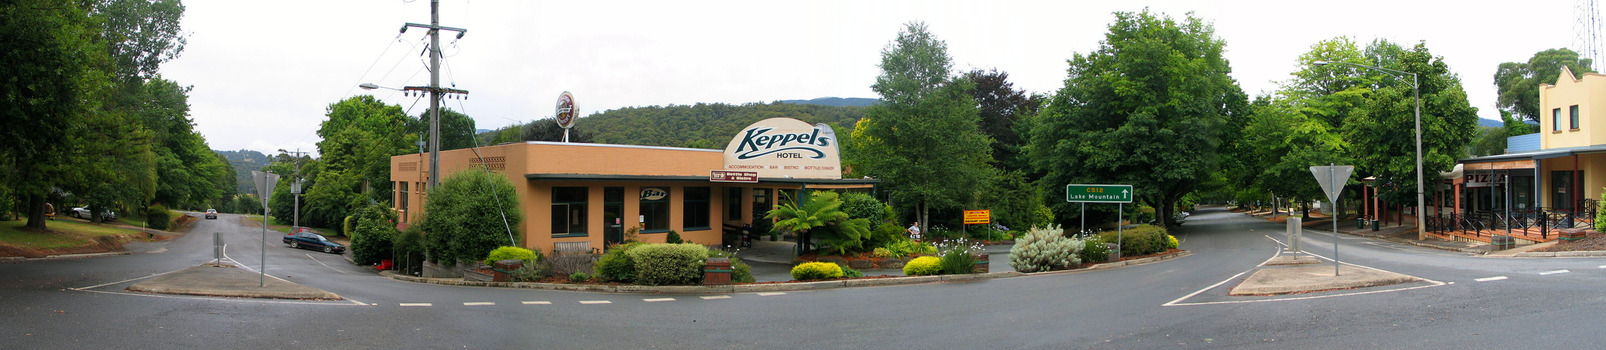 Shows Keppels Hotel on the corner of Murchison and Lyell Streets in Marysville in Victoria. View is looking down Murchison Street and down Lyell Street. On the opposite corner is a group of shops. In front of the hotel is a green sign showing the direction to drive to Lake Mountain.